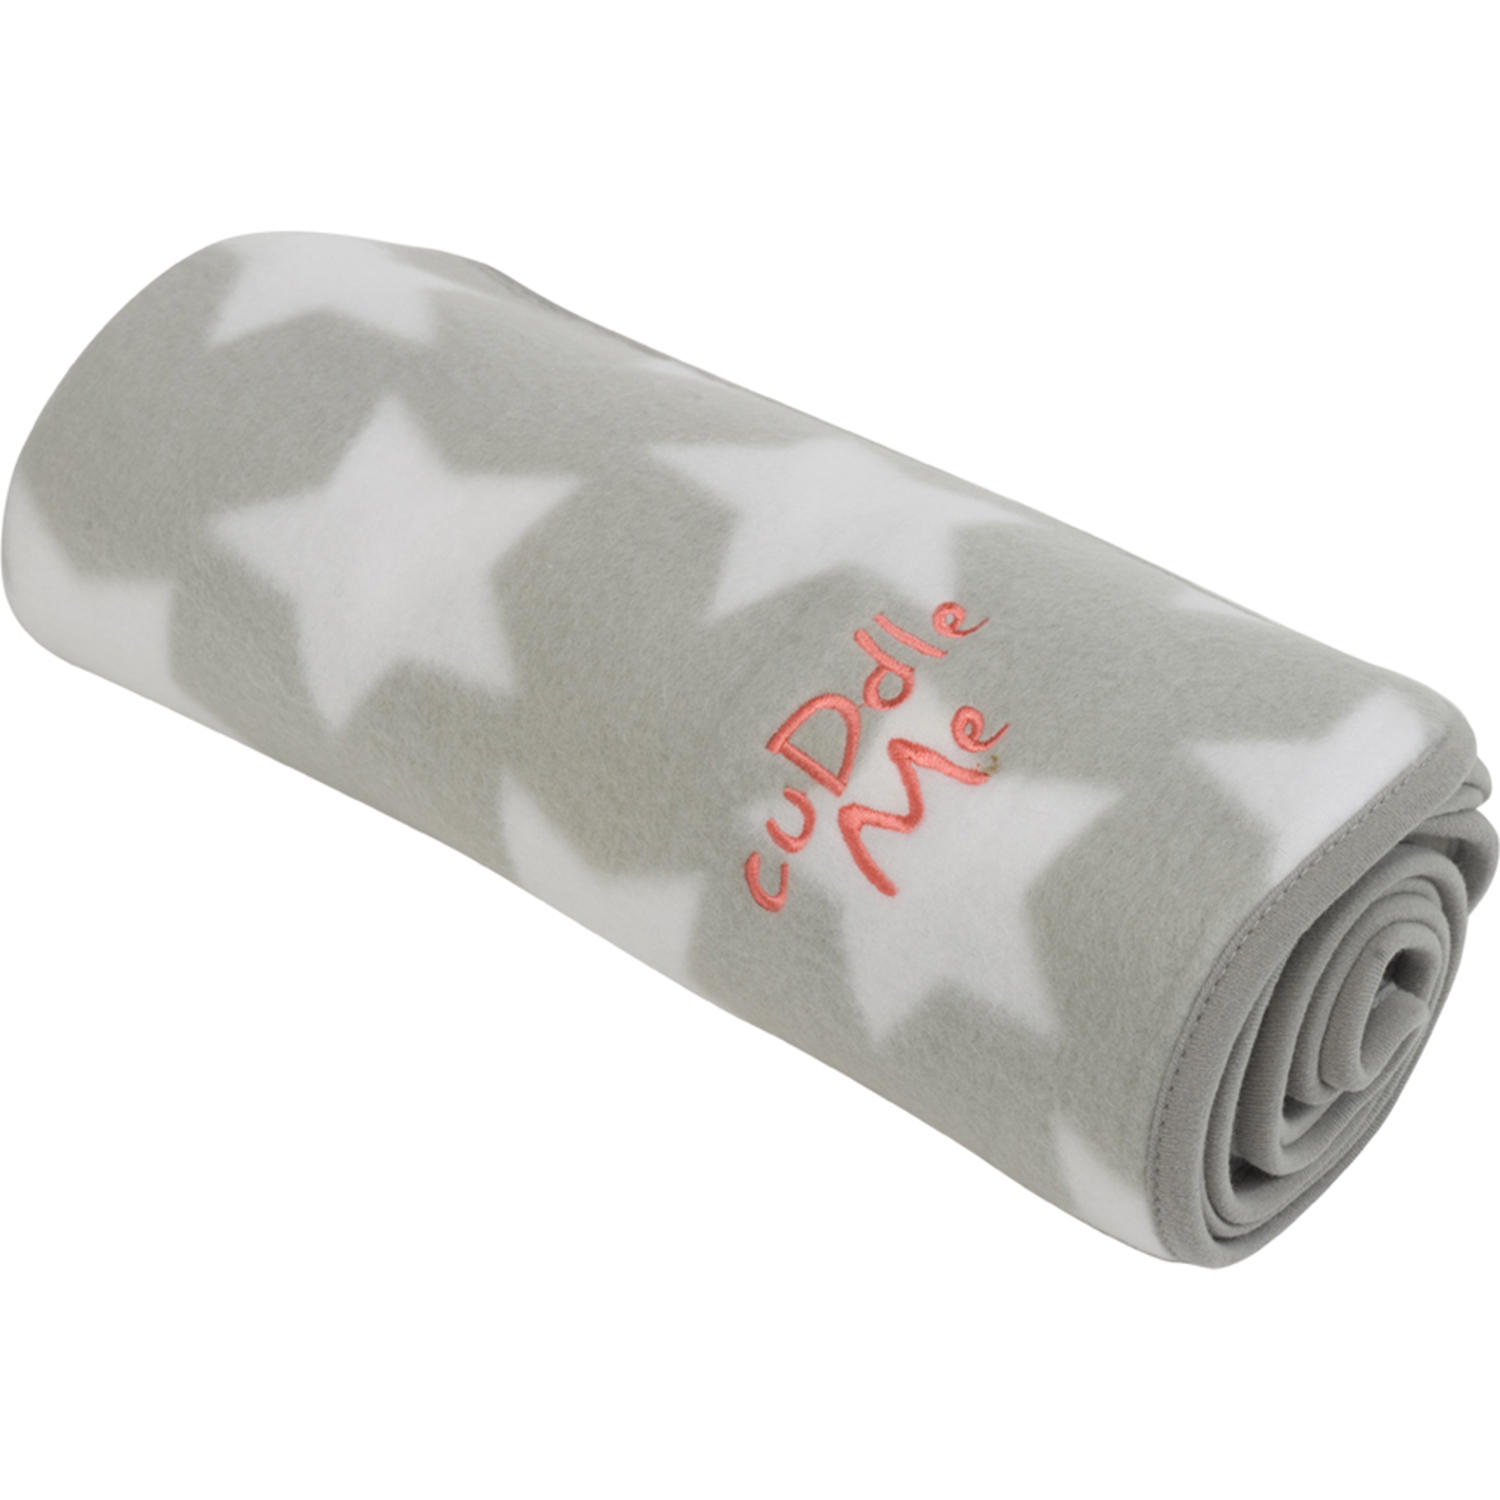 Little Petface grey and white star fleece puppy blanket rolled up